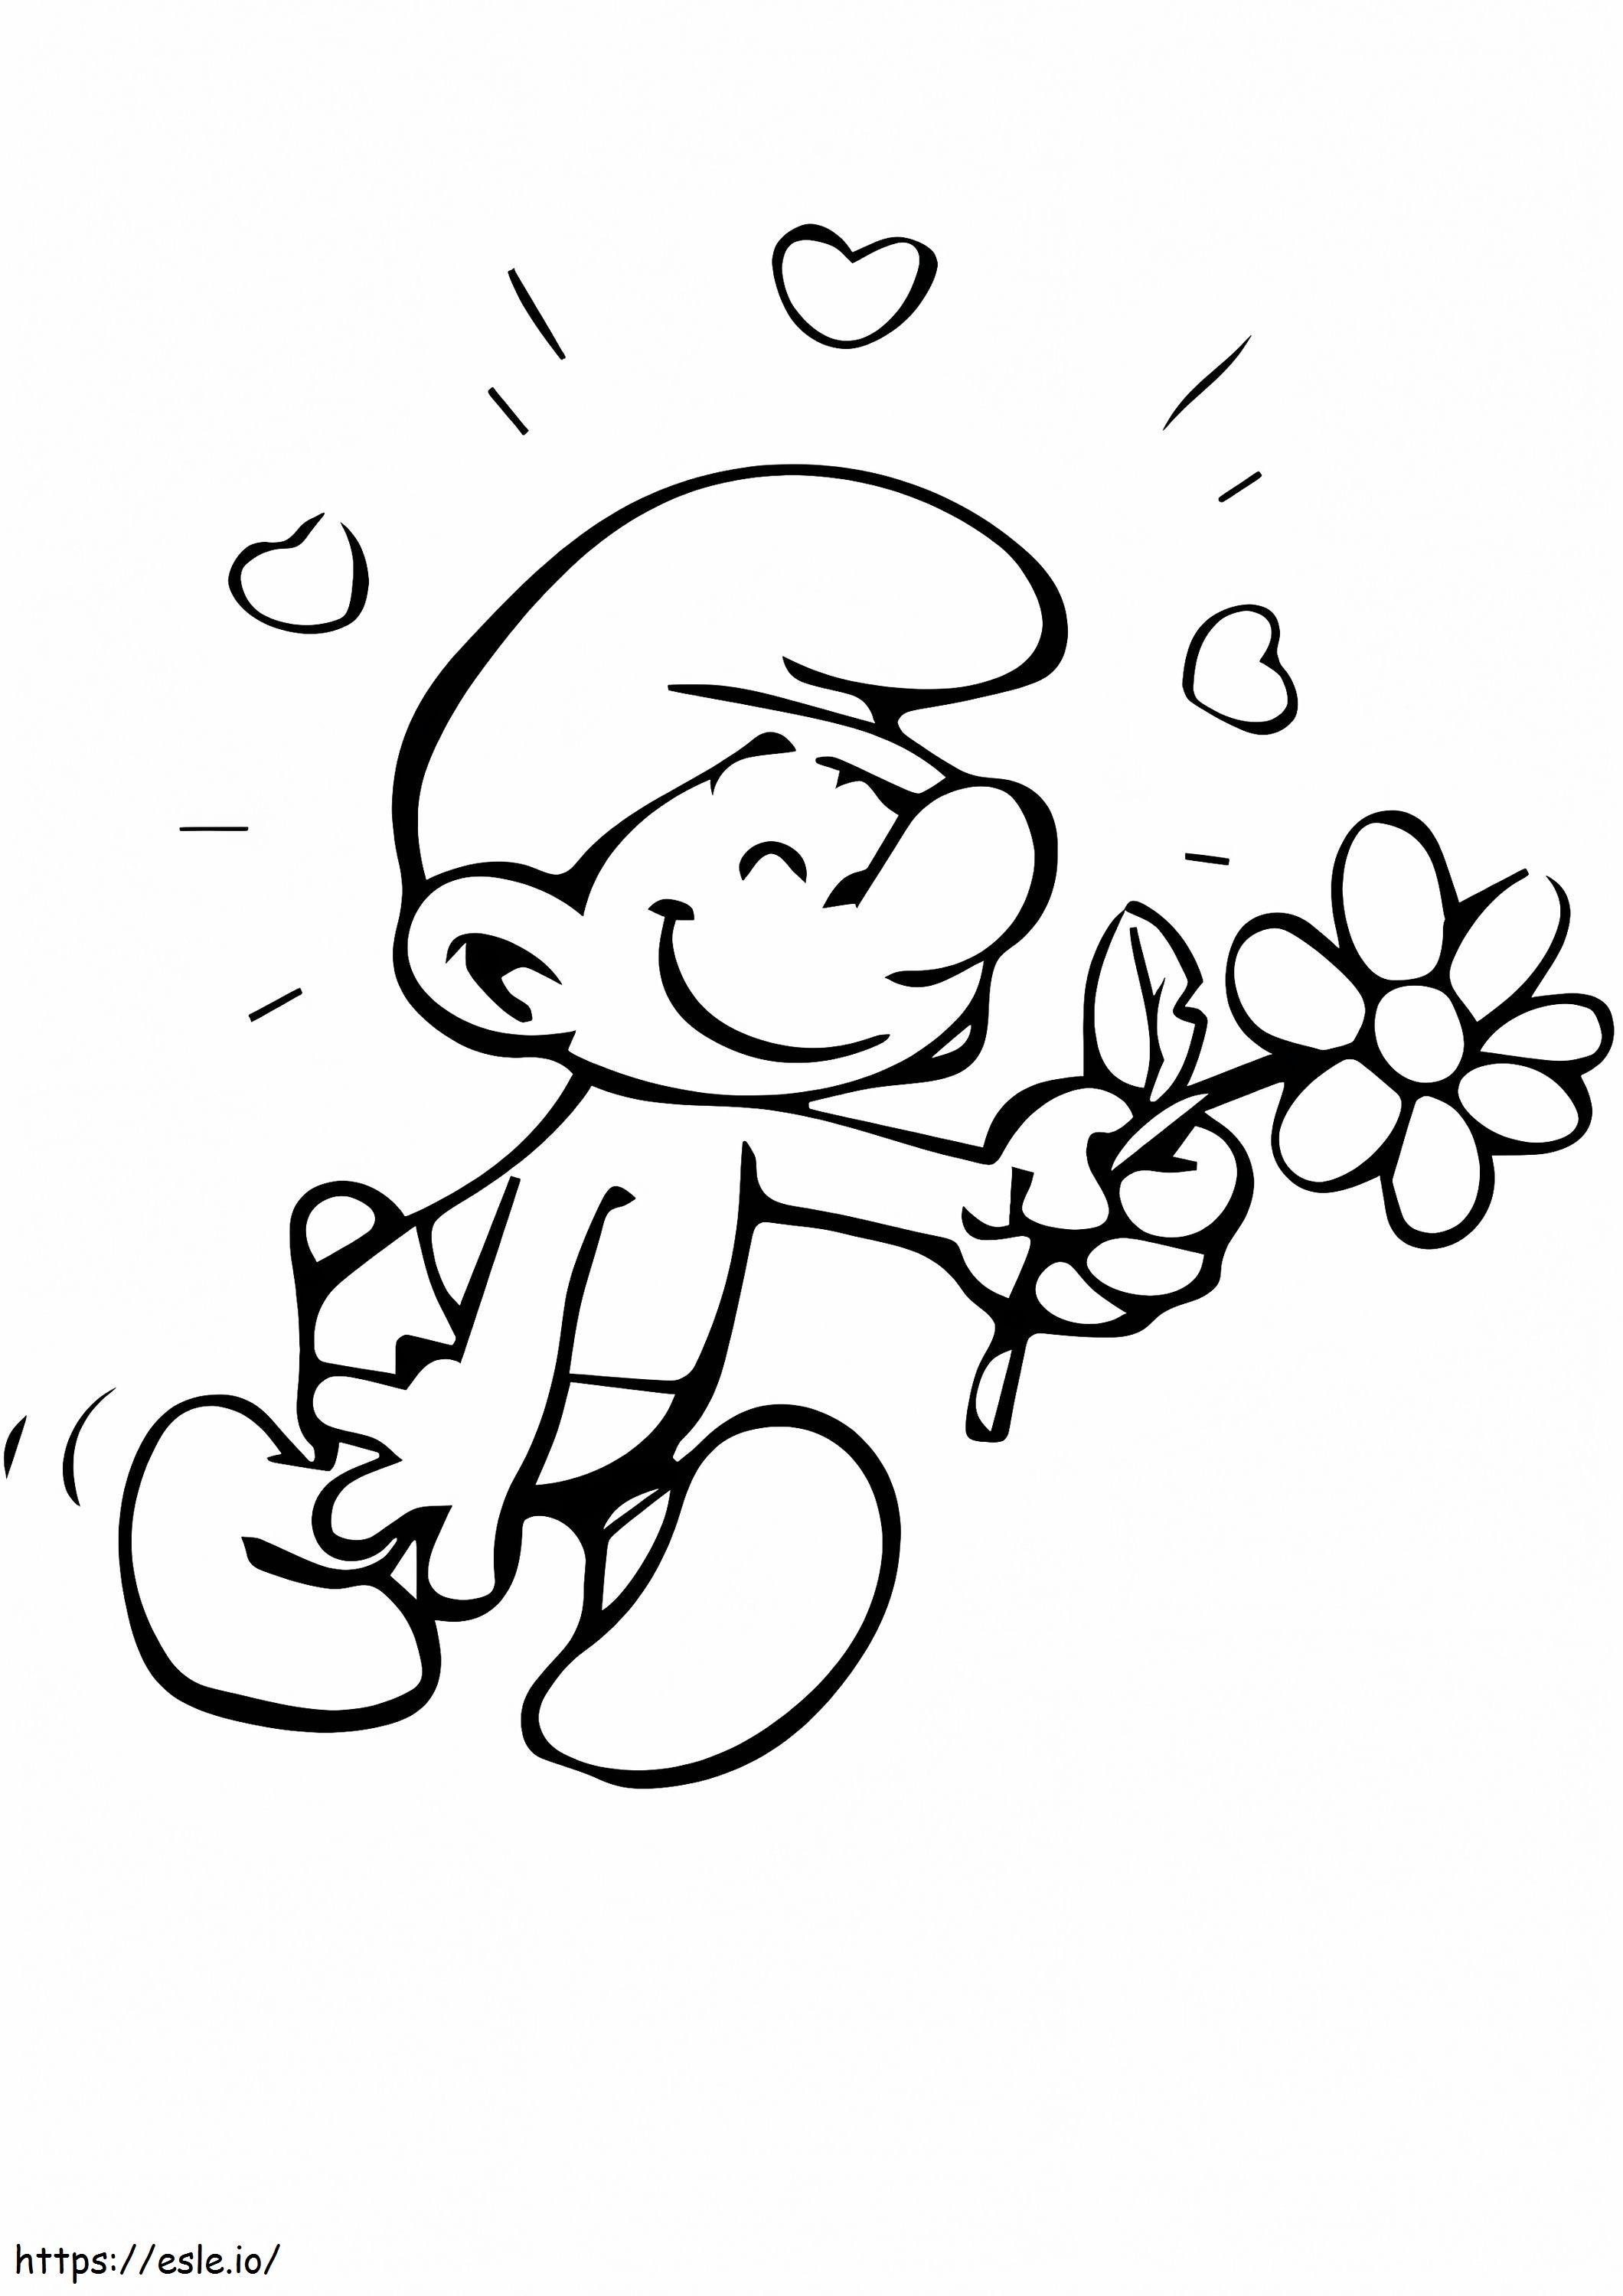 1528170191 The Smurf Boy Struck By Cupid A4 coloring page